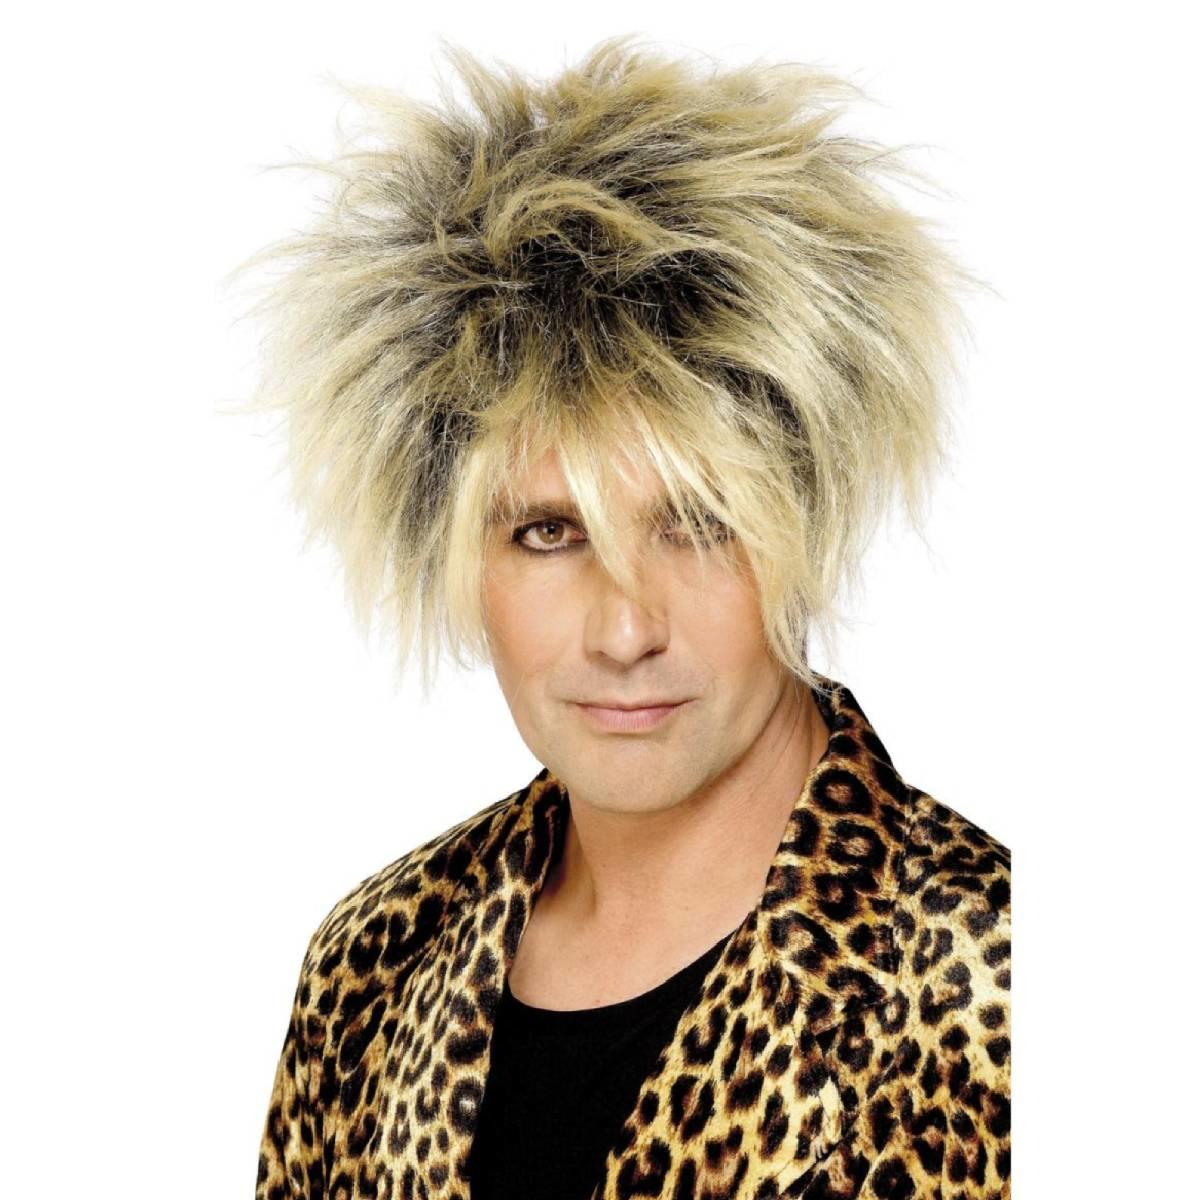 80's Wild Boy Wig in Blonde by Smiffys 42991 from the collection of men's Pop Costume Wigs available here at Karnival Costumes online party shop